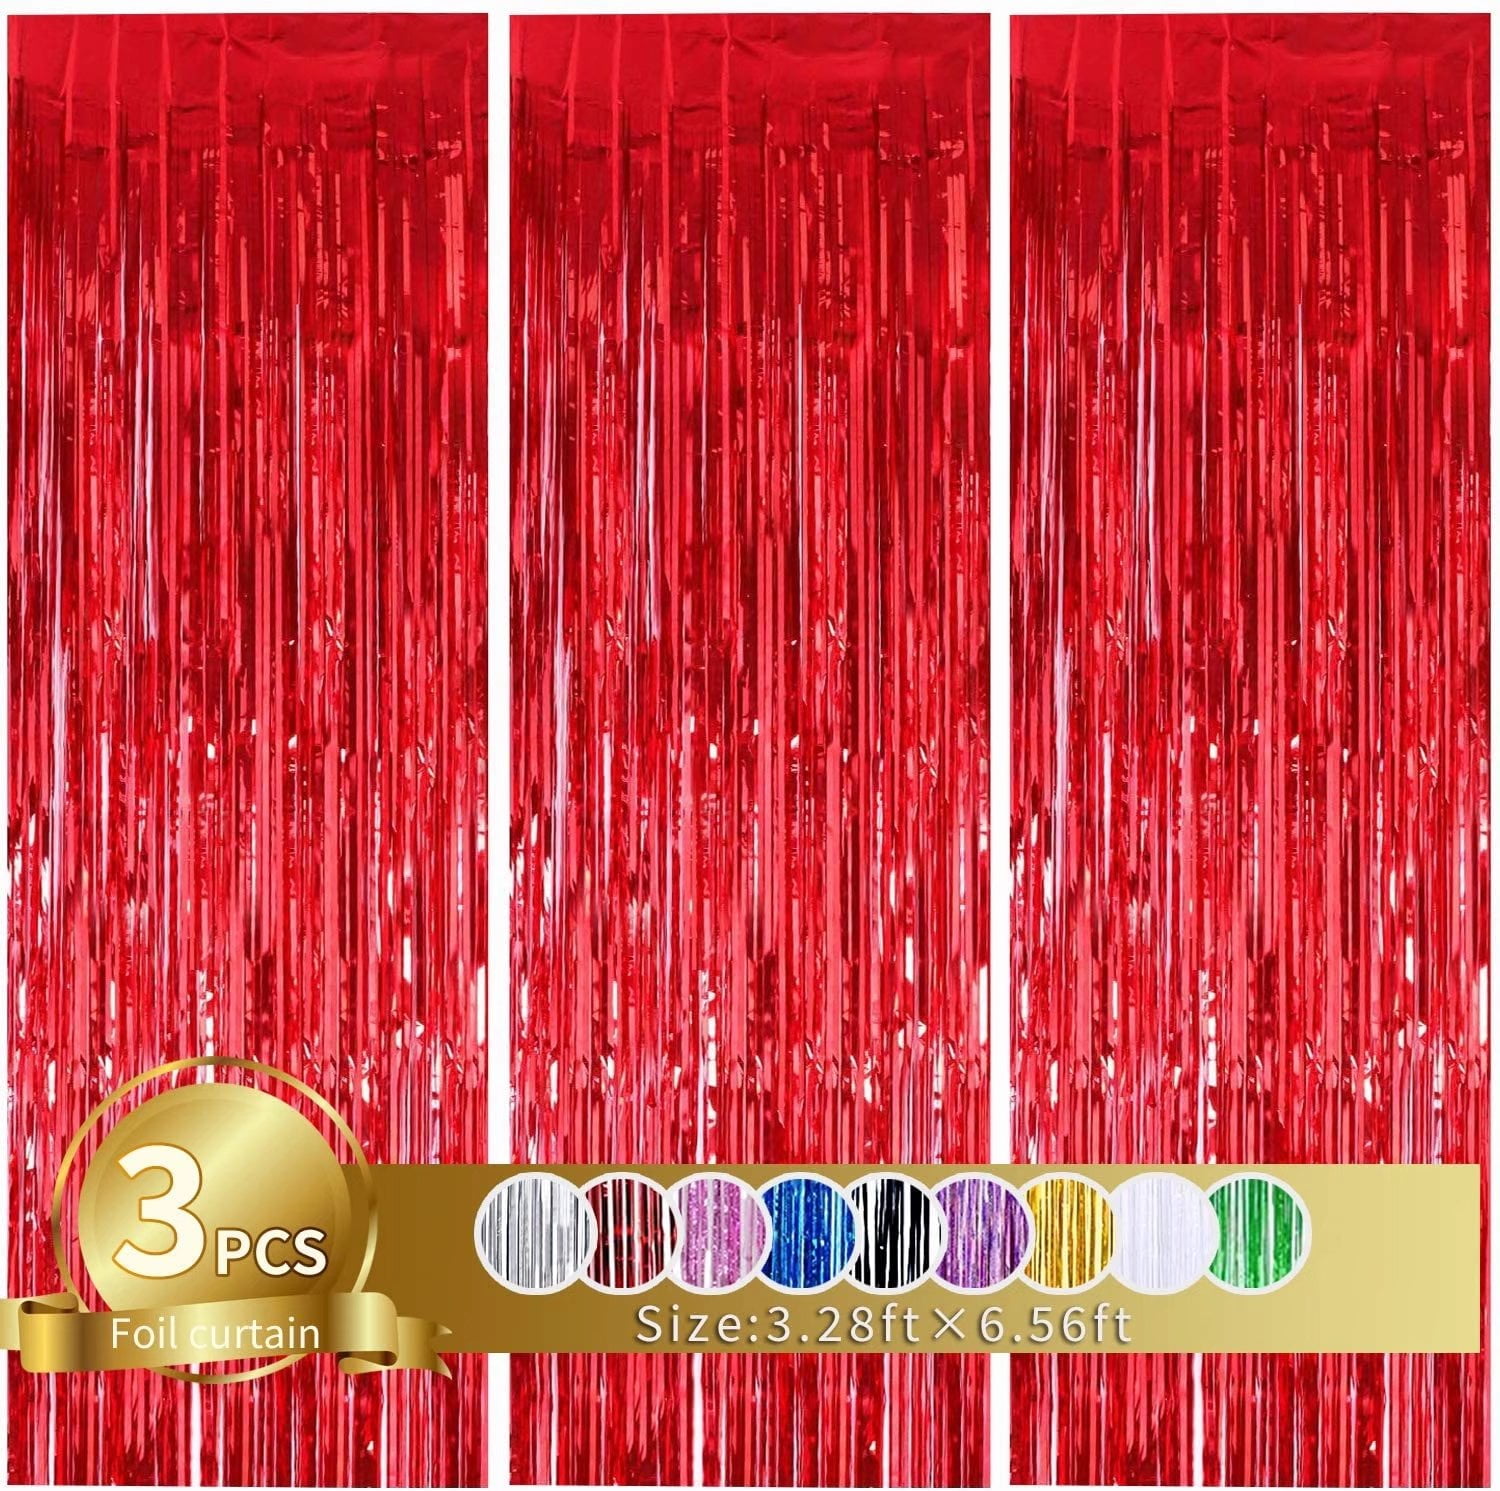 Christmas,New Year Party Decorations 3Pcs Silver Metallic Tinsel Foil Fringe Curtains,3.28ft x 6.56ft Silver Photo Booth Backdrop Curtain,Photo Booth Props,Ideal for Bachelorette,Birthday,Graduation 